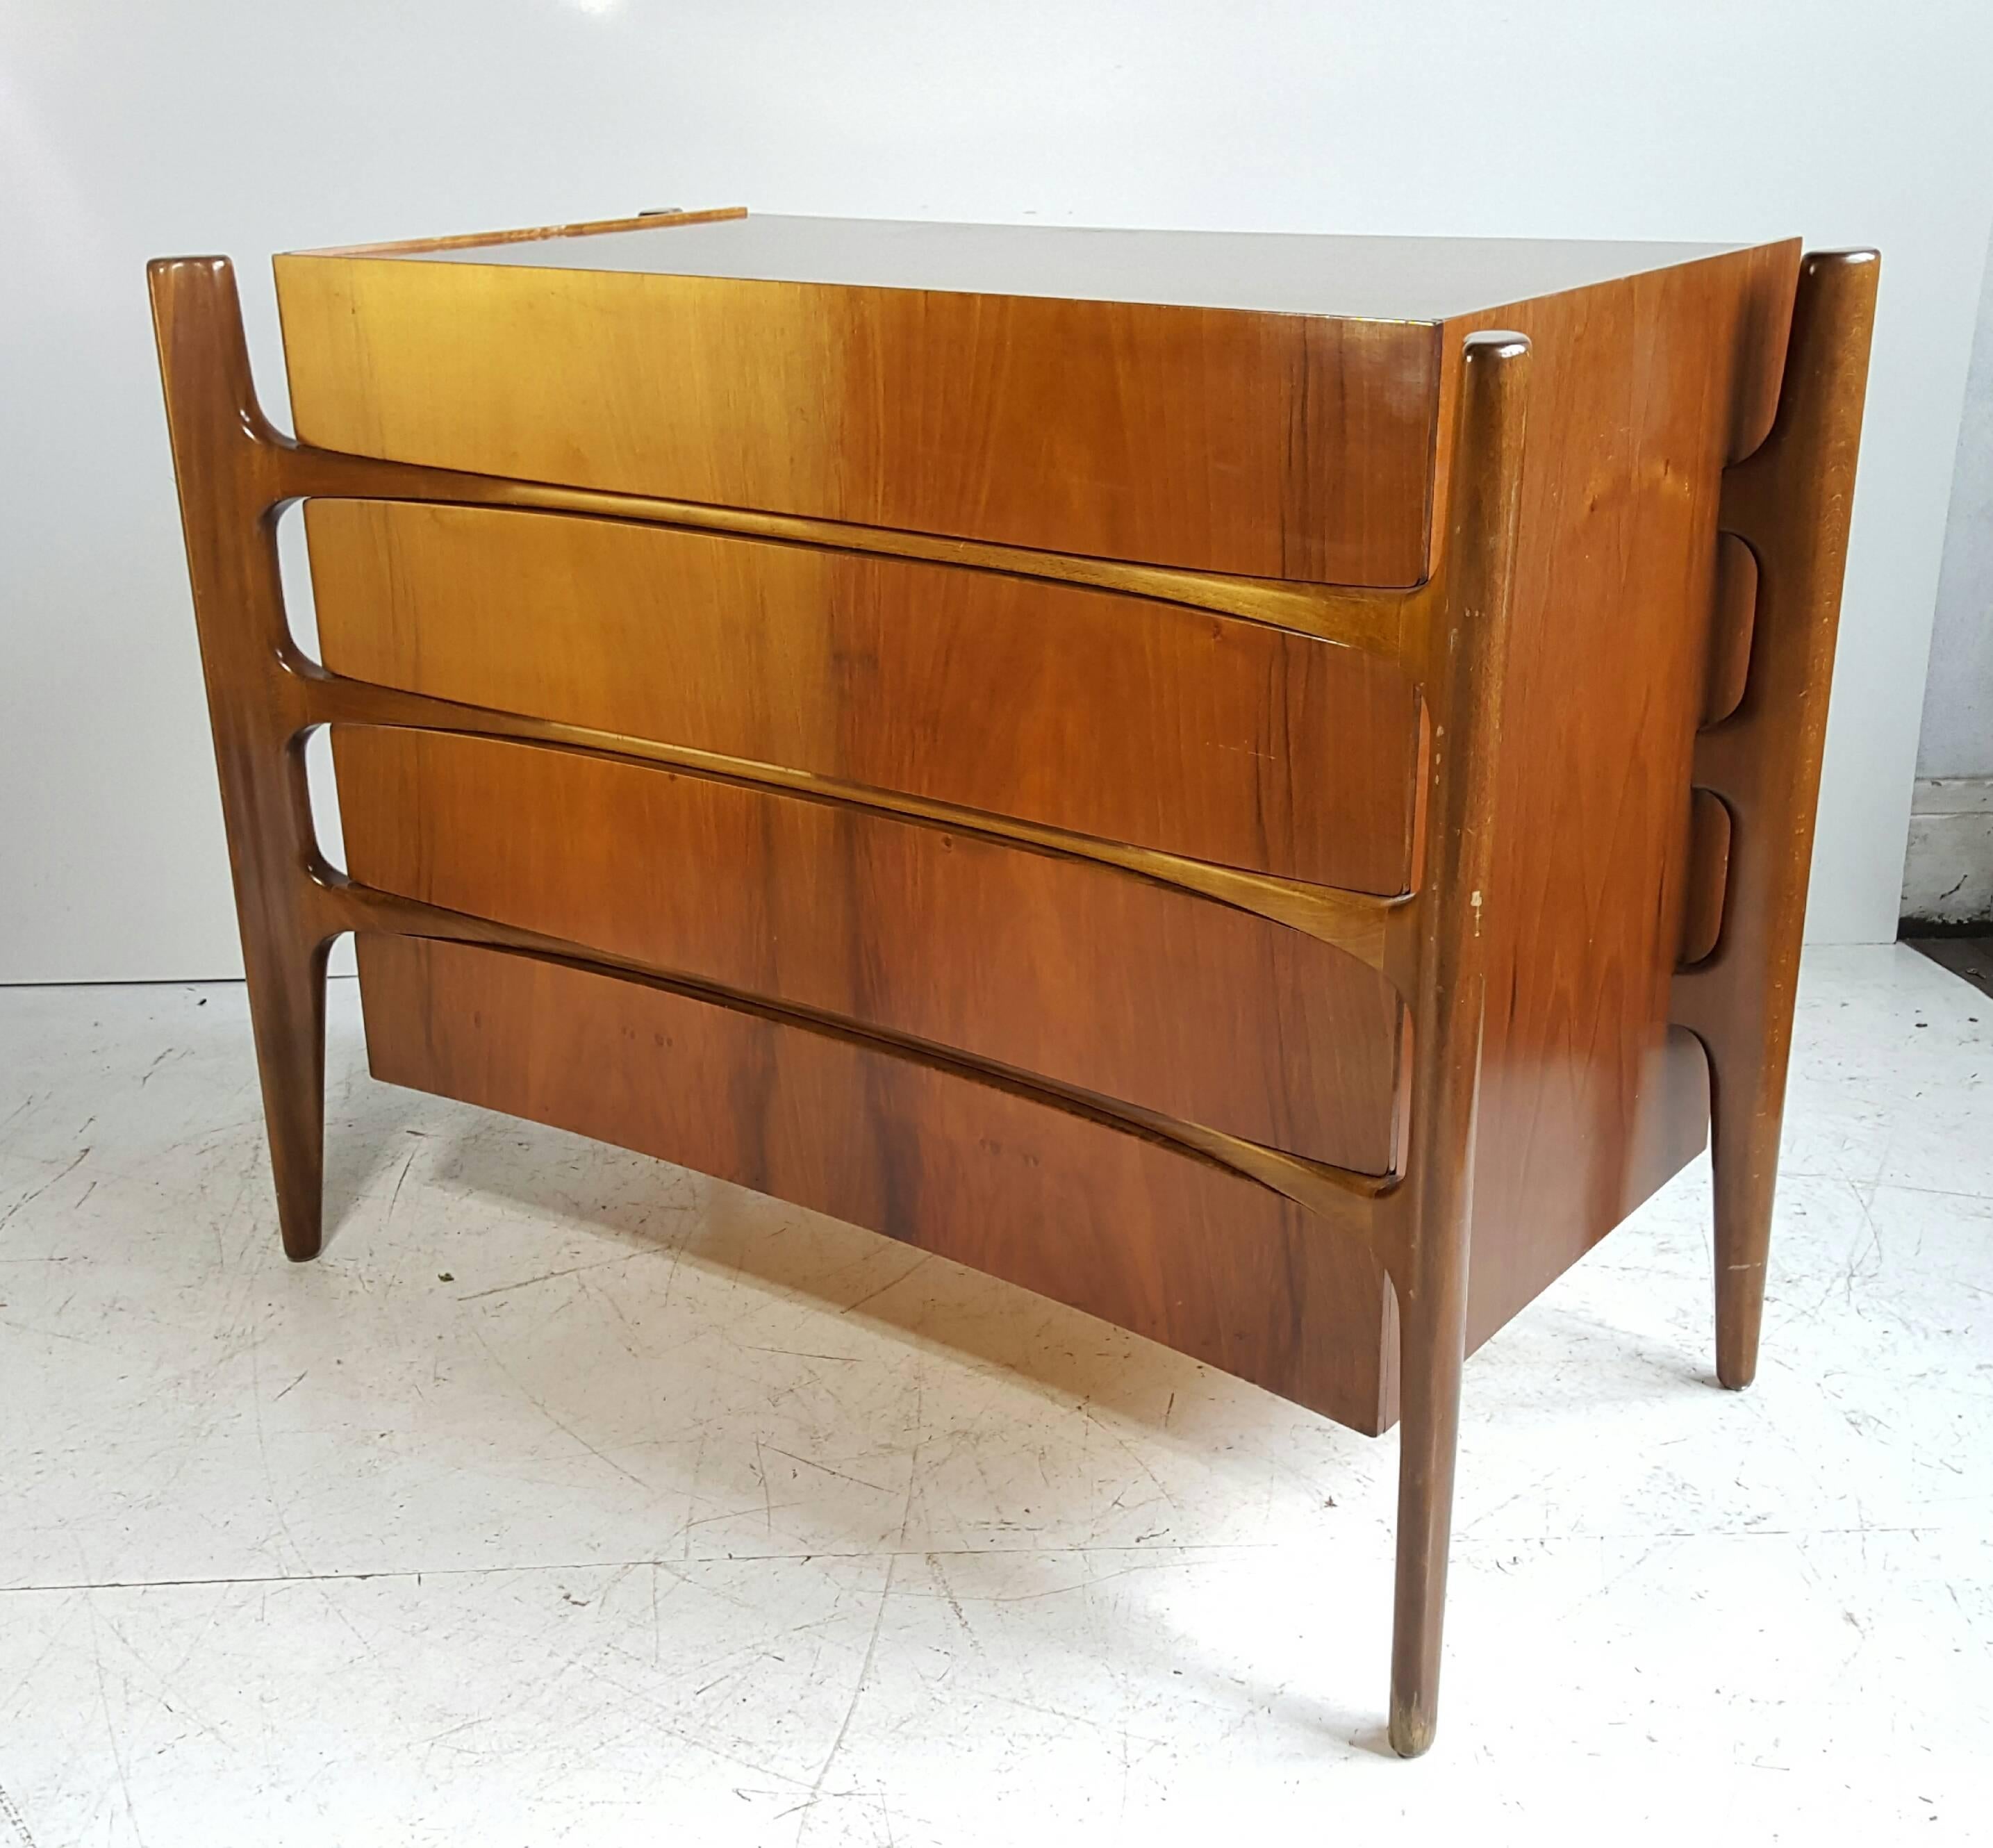 Scandinavian Modern Rare William Hinn Curved Chest of Drawers in Walnut with Skeletal Frame For Sale